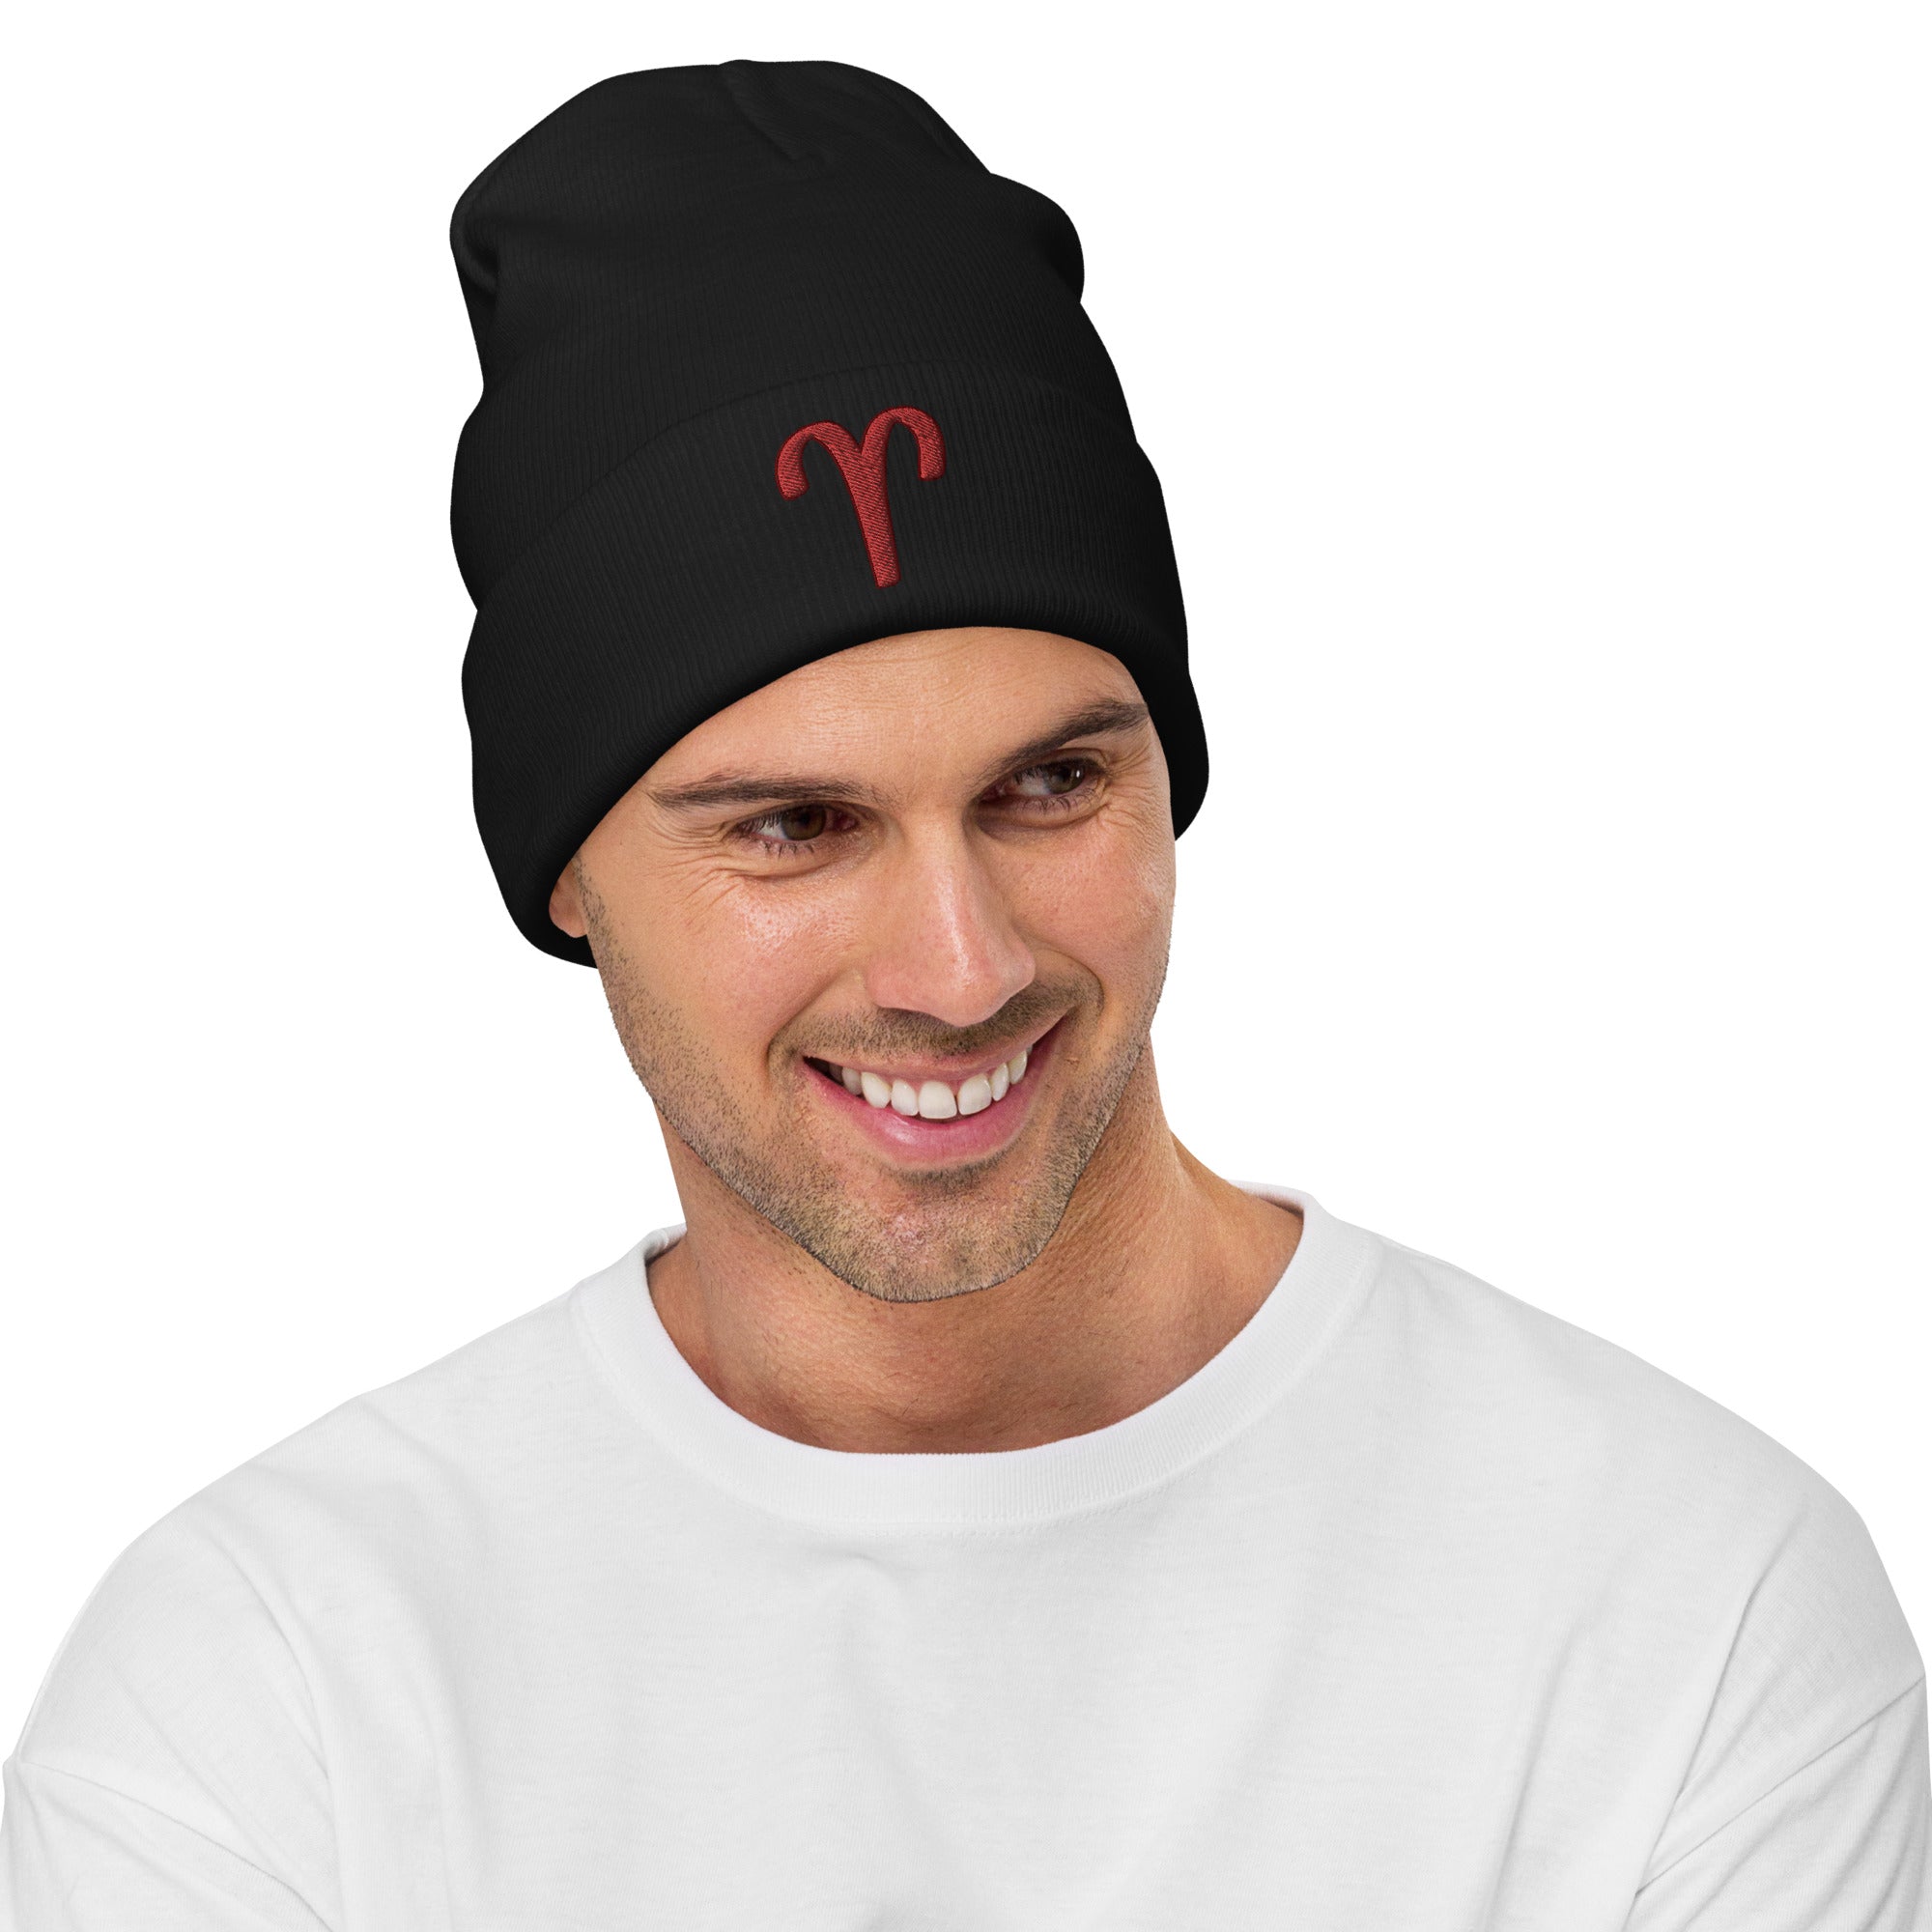 Zodiac Sign Aries Embroidered Cuff Beanie Astrology Horoscope Red Thread - Edge of Life Designs